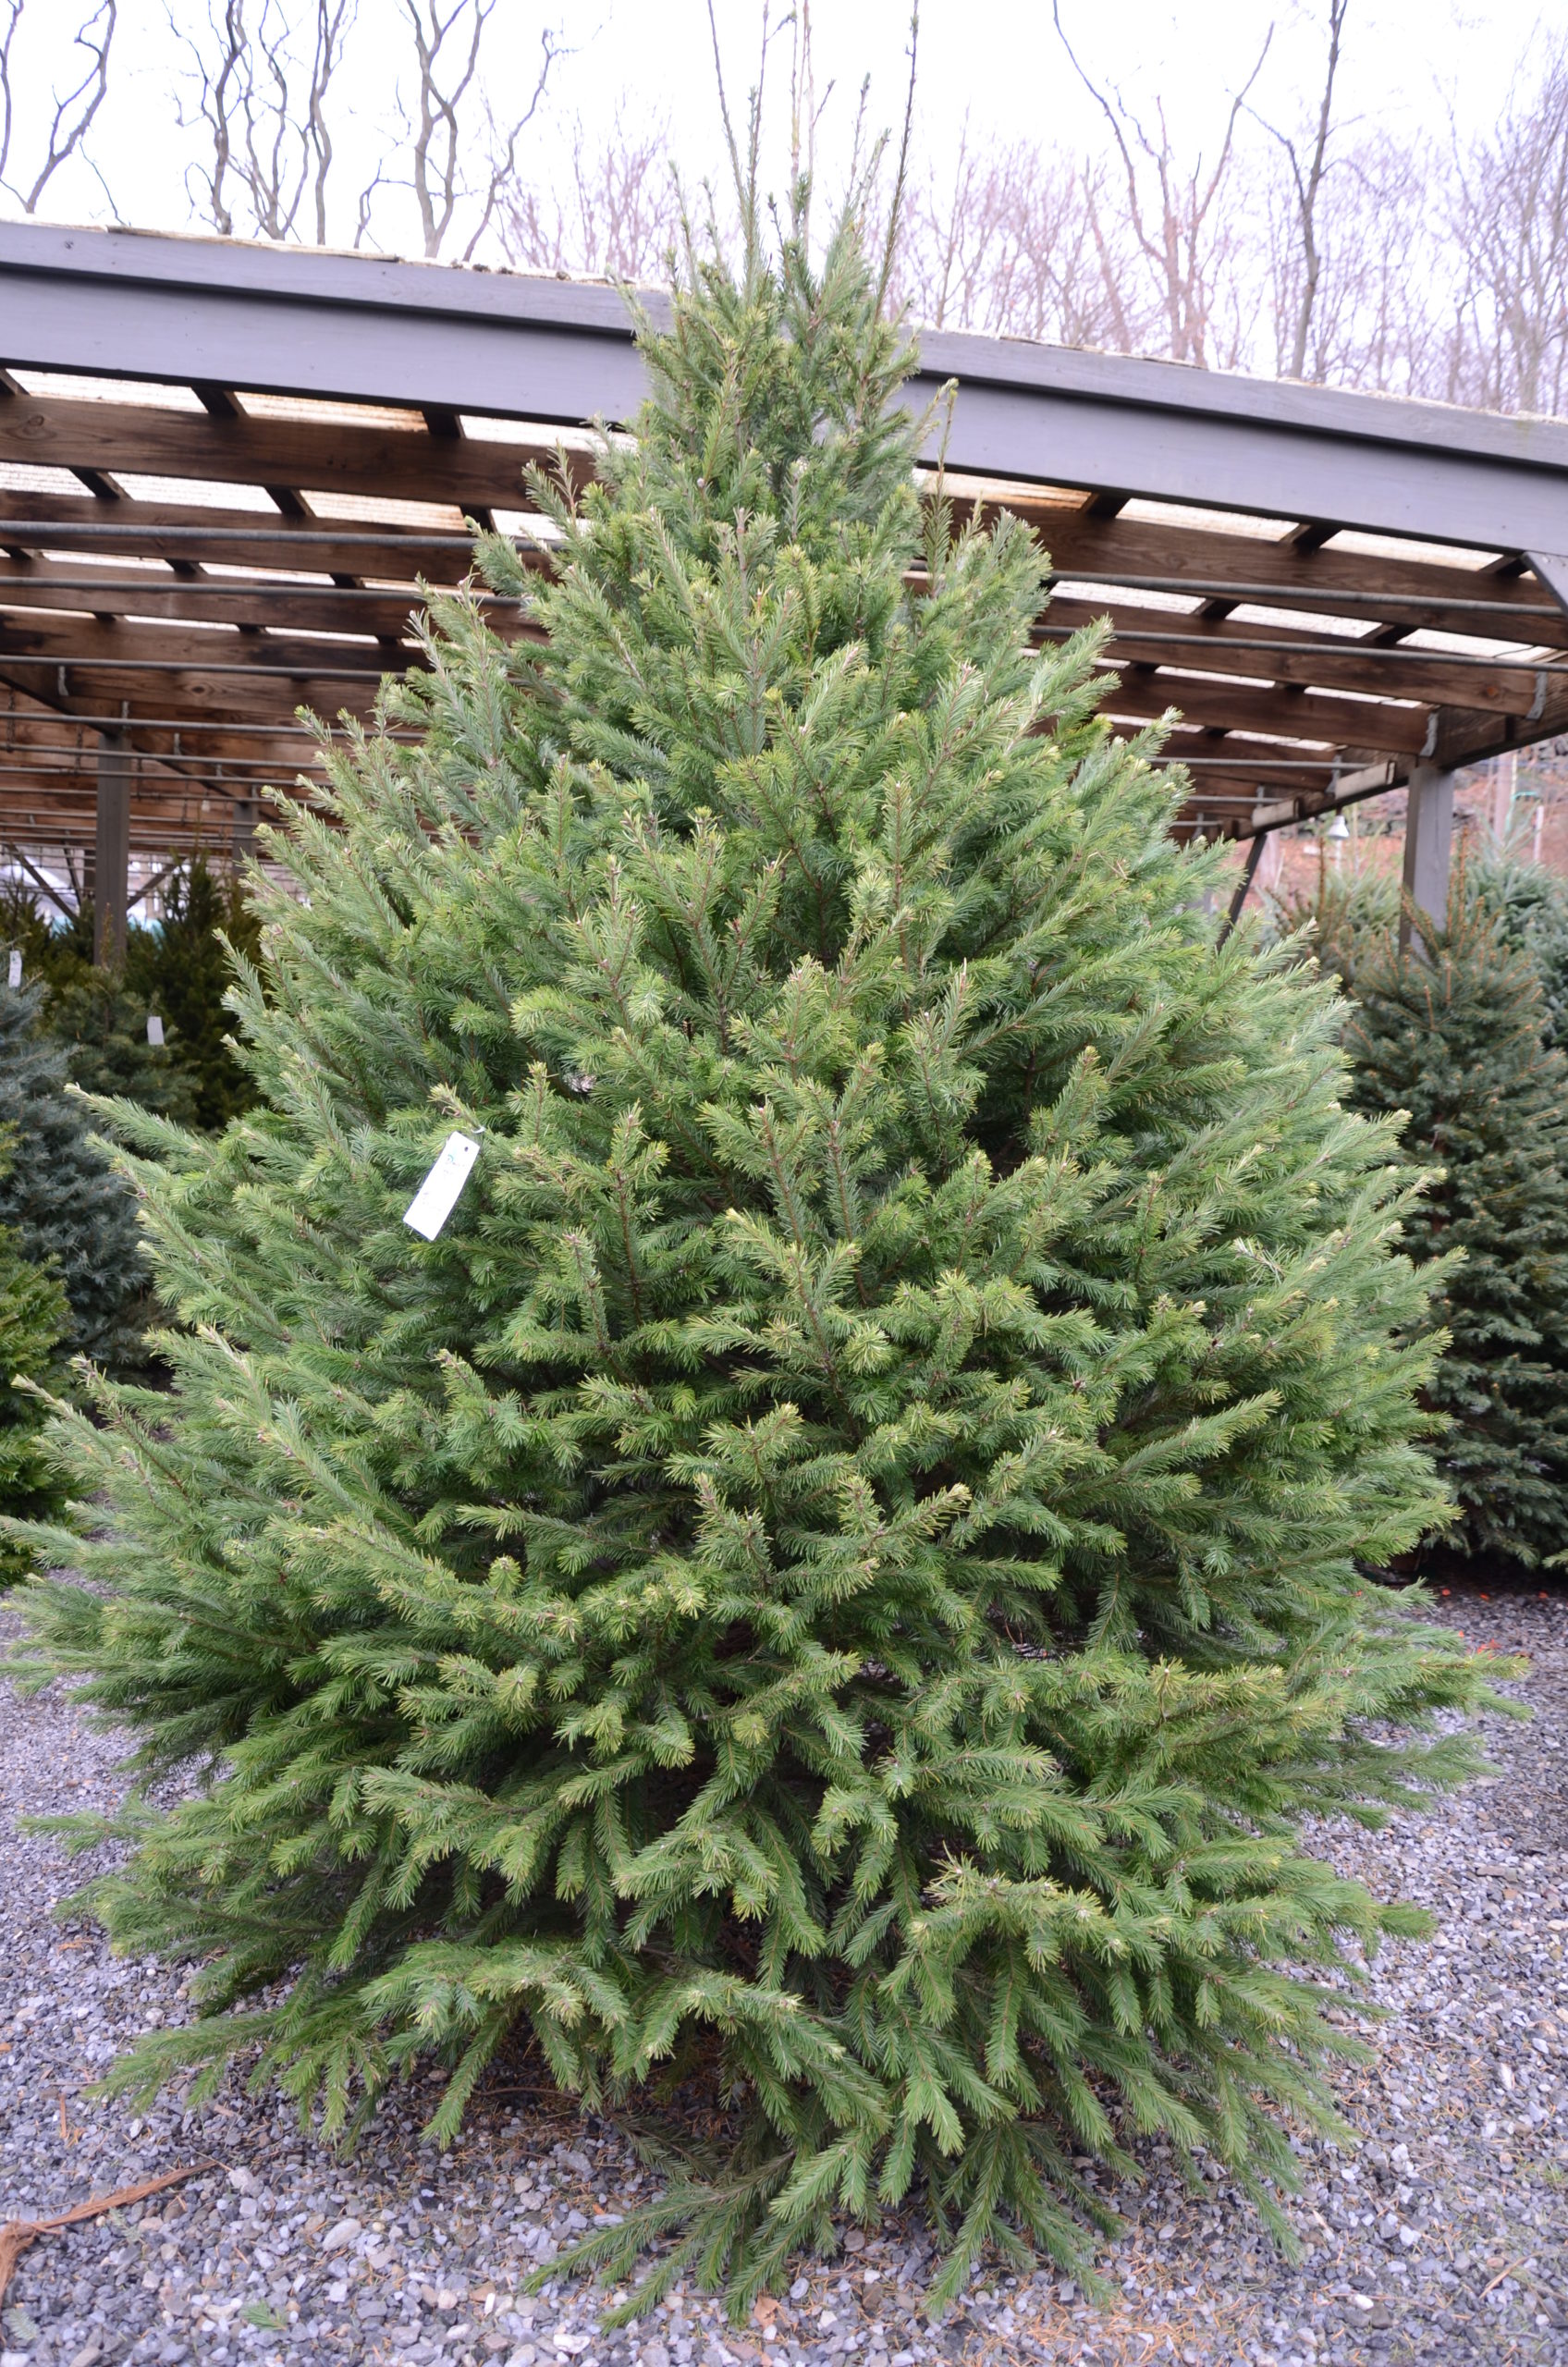 Christmas trees should be full and lush from tip to base. They can be 